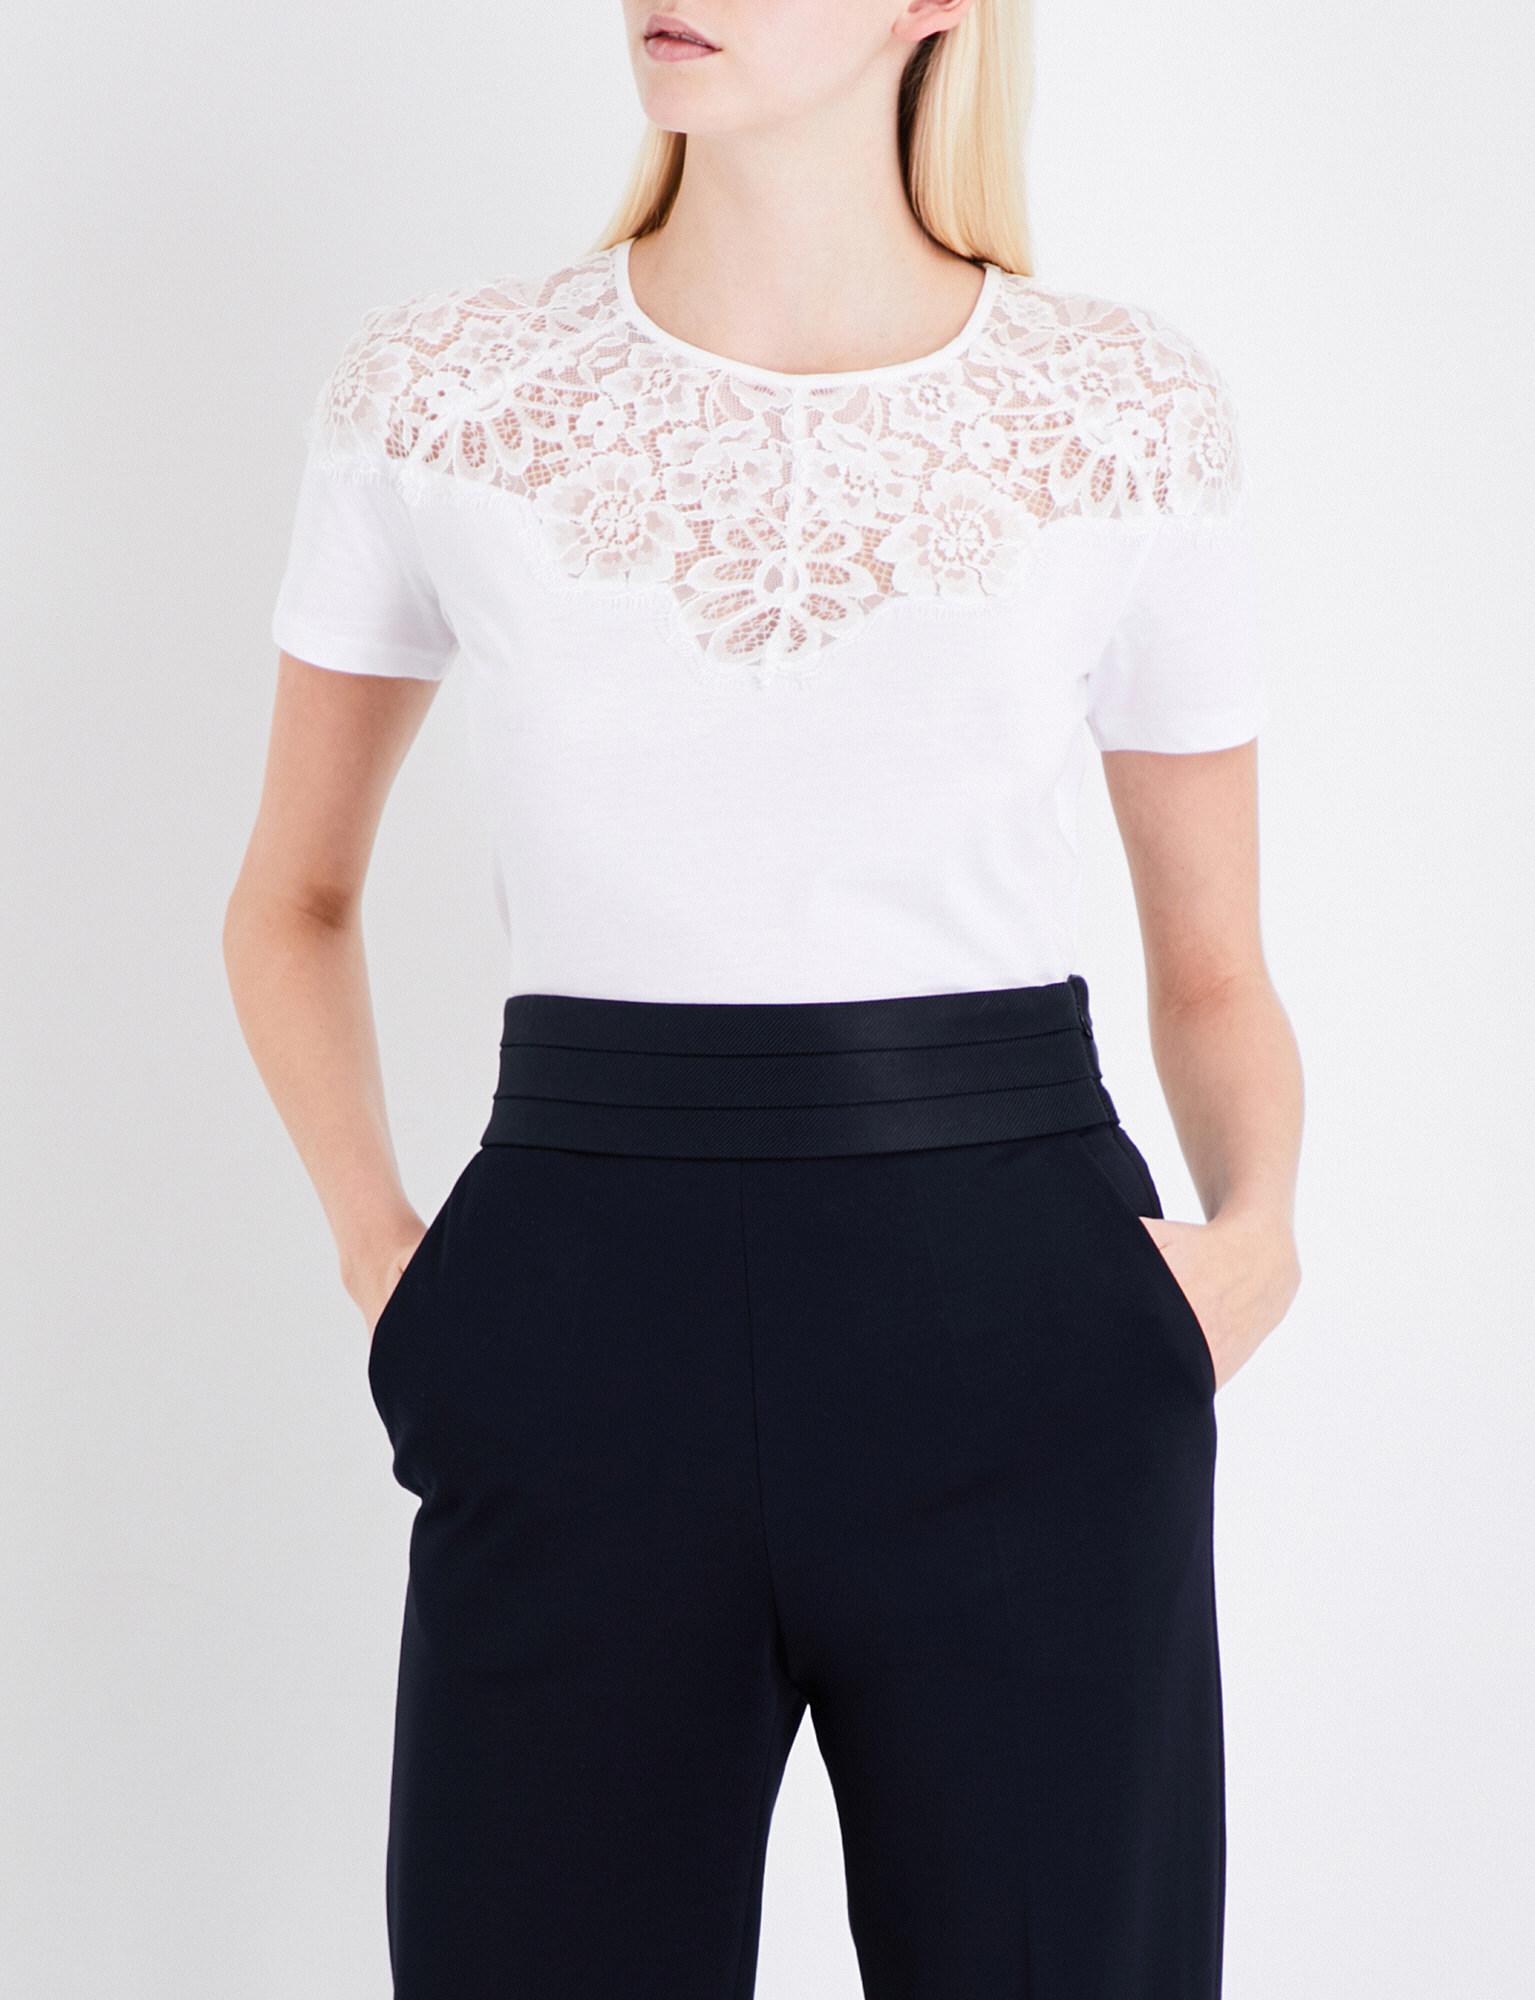 Lyst - Sandro Floral-lace Cotton-jersey T-shirt in White